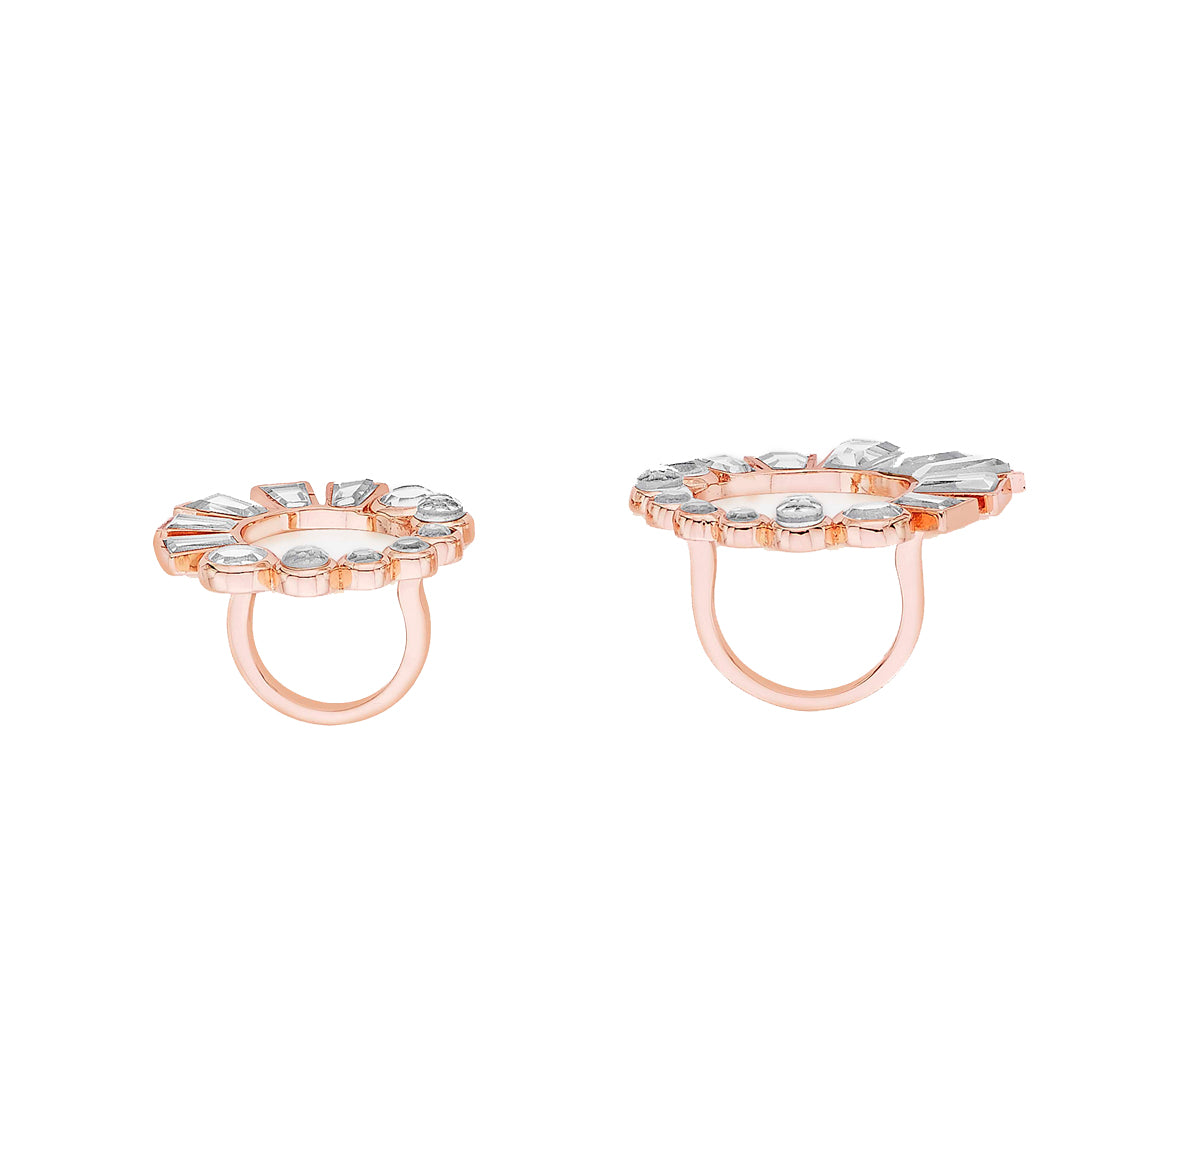 Bombay deco set of two mirror rings set